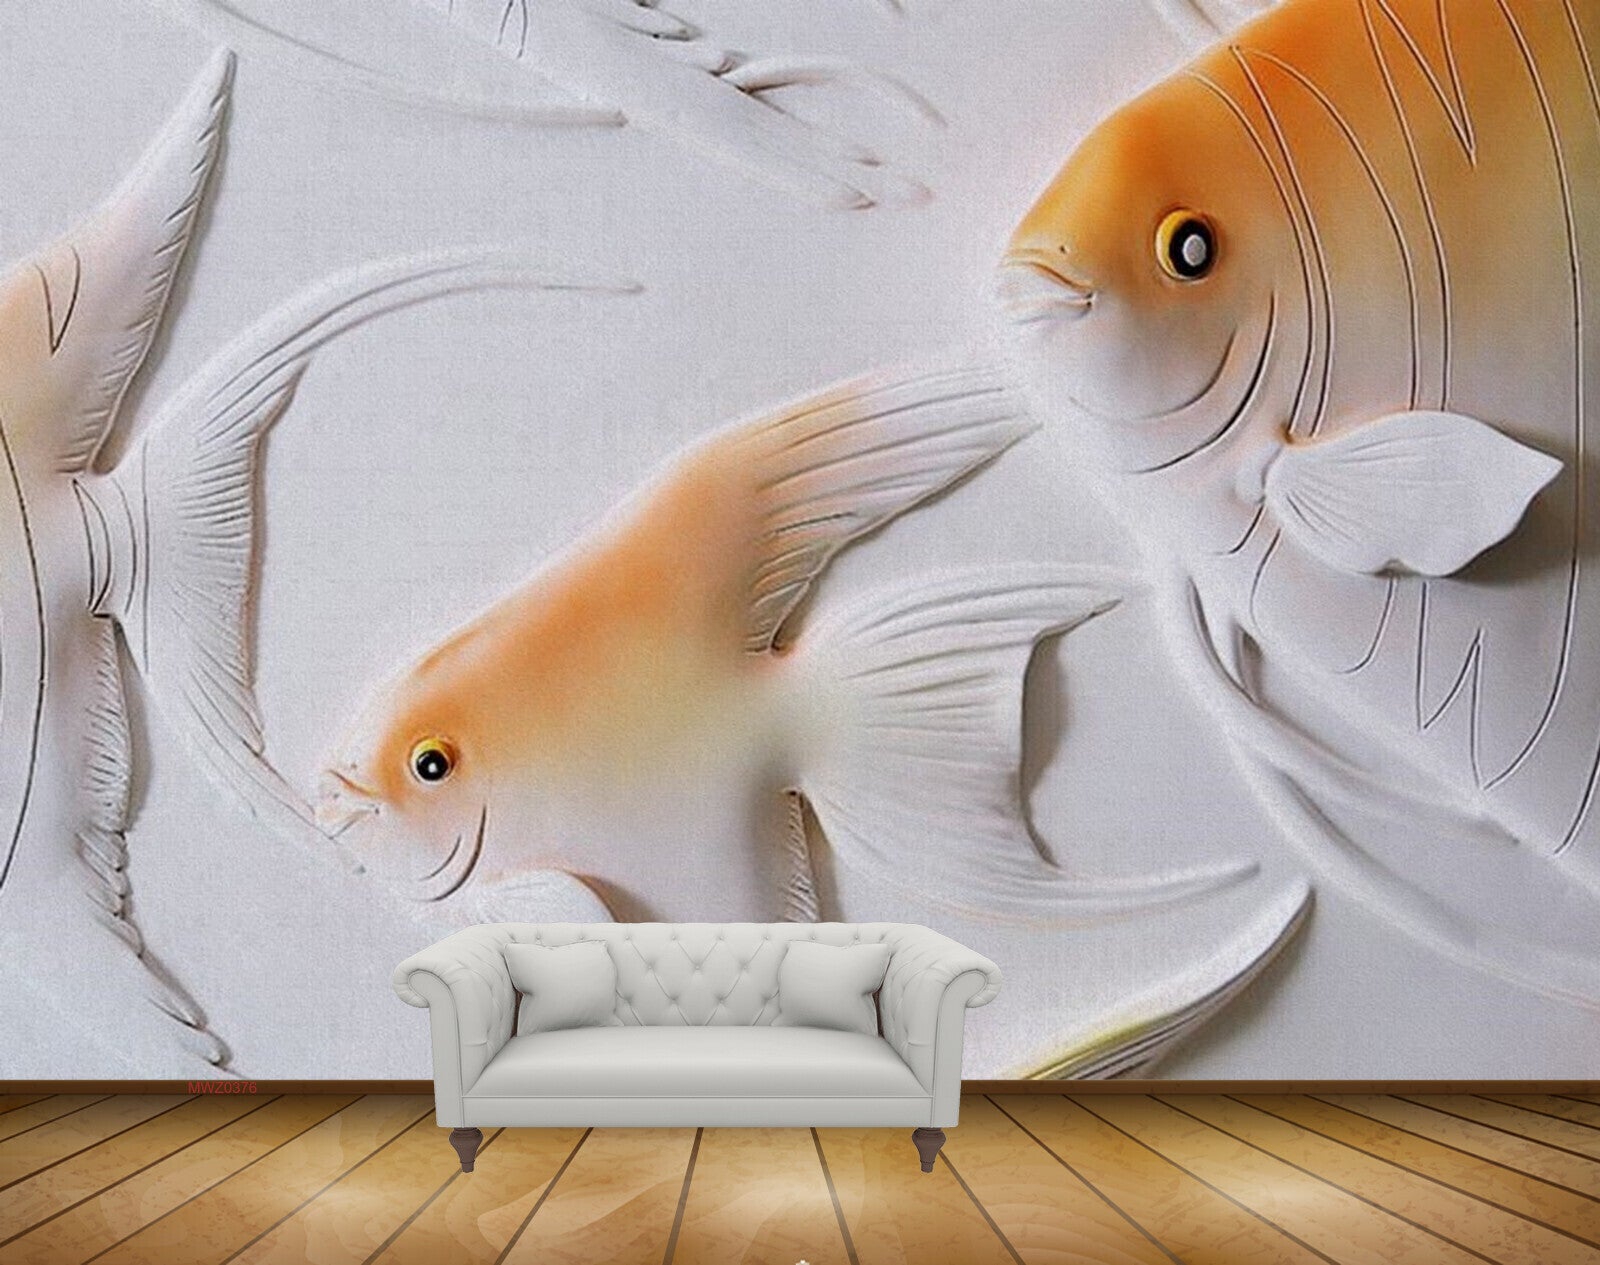 Free download Android 3D Koi Fish Wallpaper HD Fish Live Wallpapers Free  APK 720x1280 for your Desktop Mobile  Tablet  Explore 13 3D Koi  Wallpapers  Koi Fish Wallpapers Koi Fish